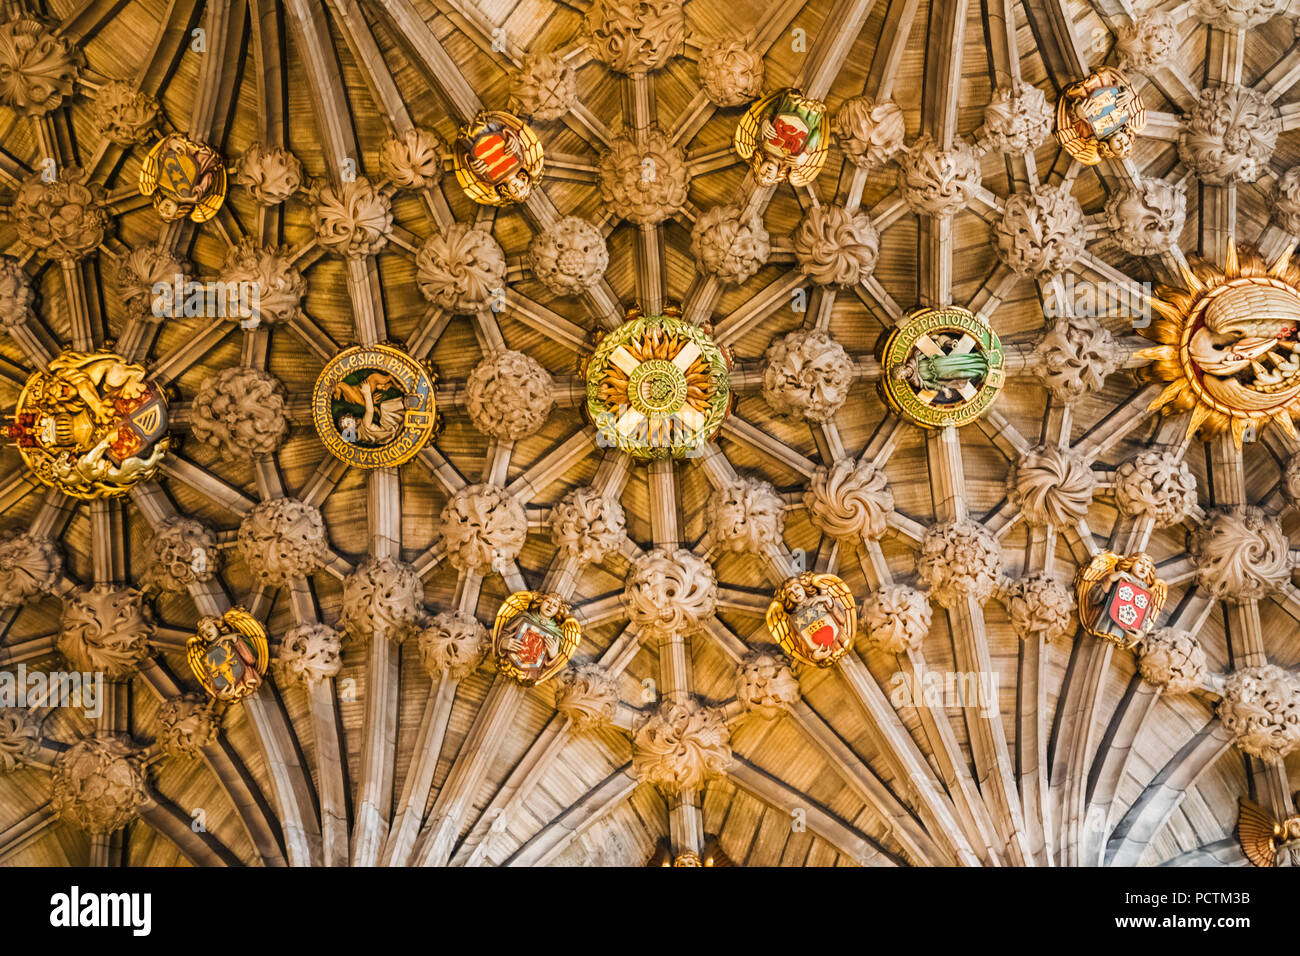 Great Britain, Scotland, Edinburgh, The Royal Mile, St.Giles' Cathedral, The Thistle Chapel Ceiling Stock Photo